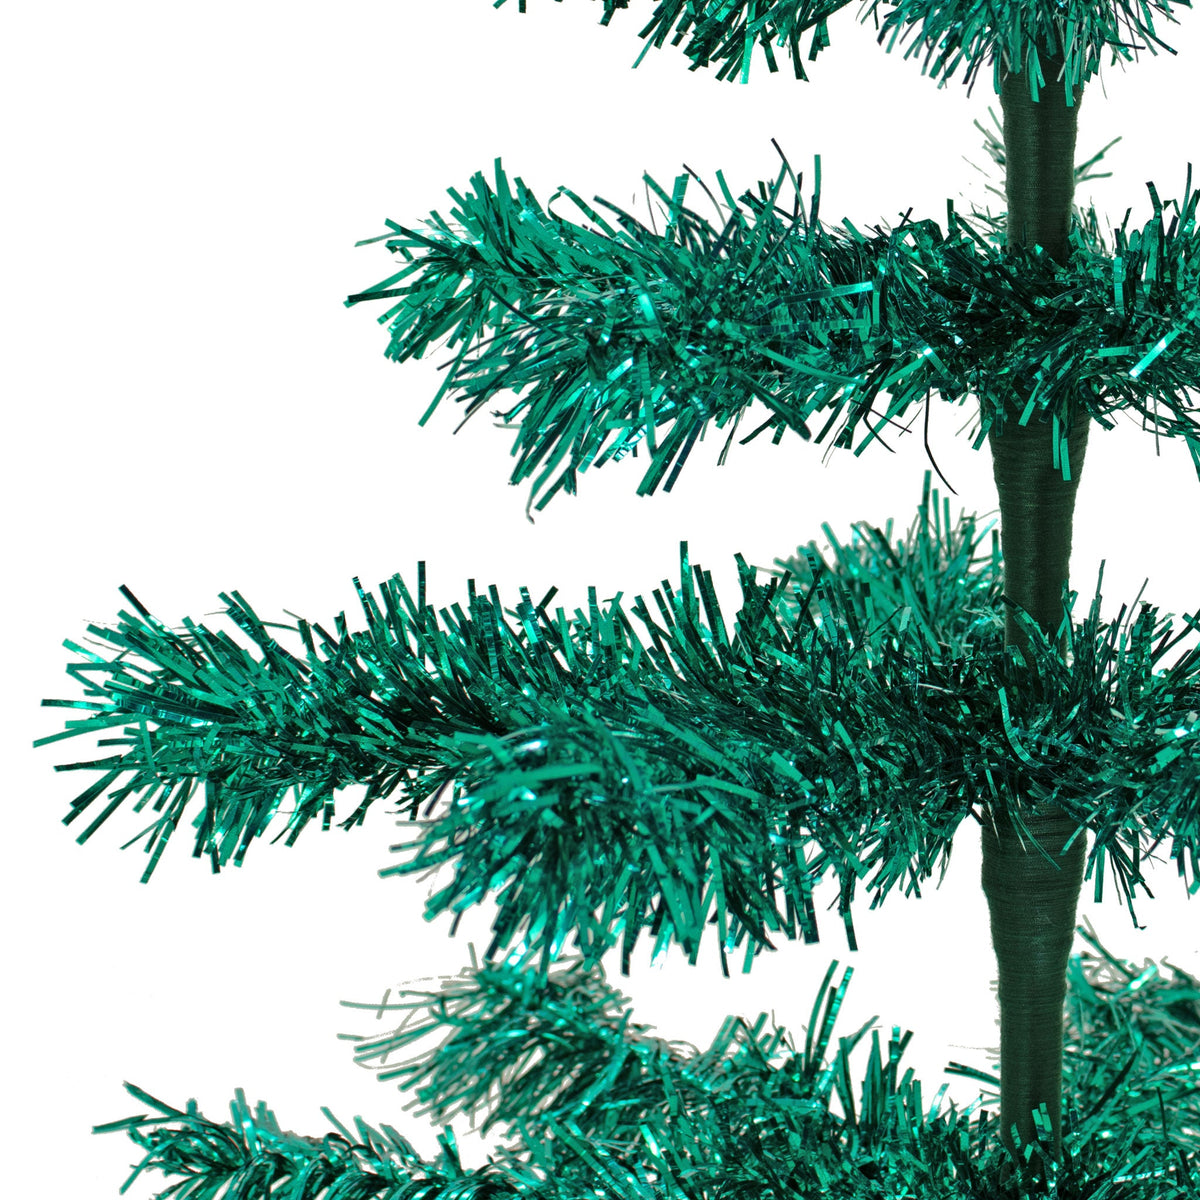 Embrace the spirit of Christmas nostalgia and make memories to last a lifetime with our Limited Edition Emerald Green Vintage Tinsel Christmas Tree.  Don't miss your chance to own a piece of holiday history – shop now before they're gone for good.